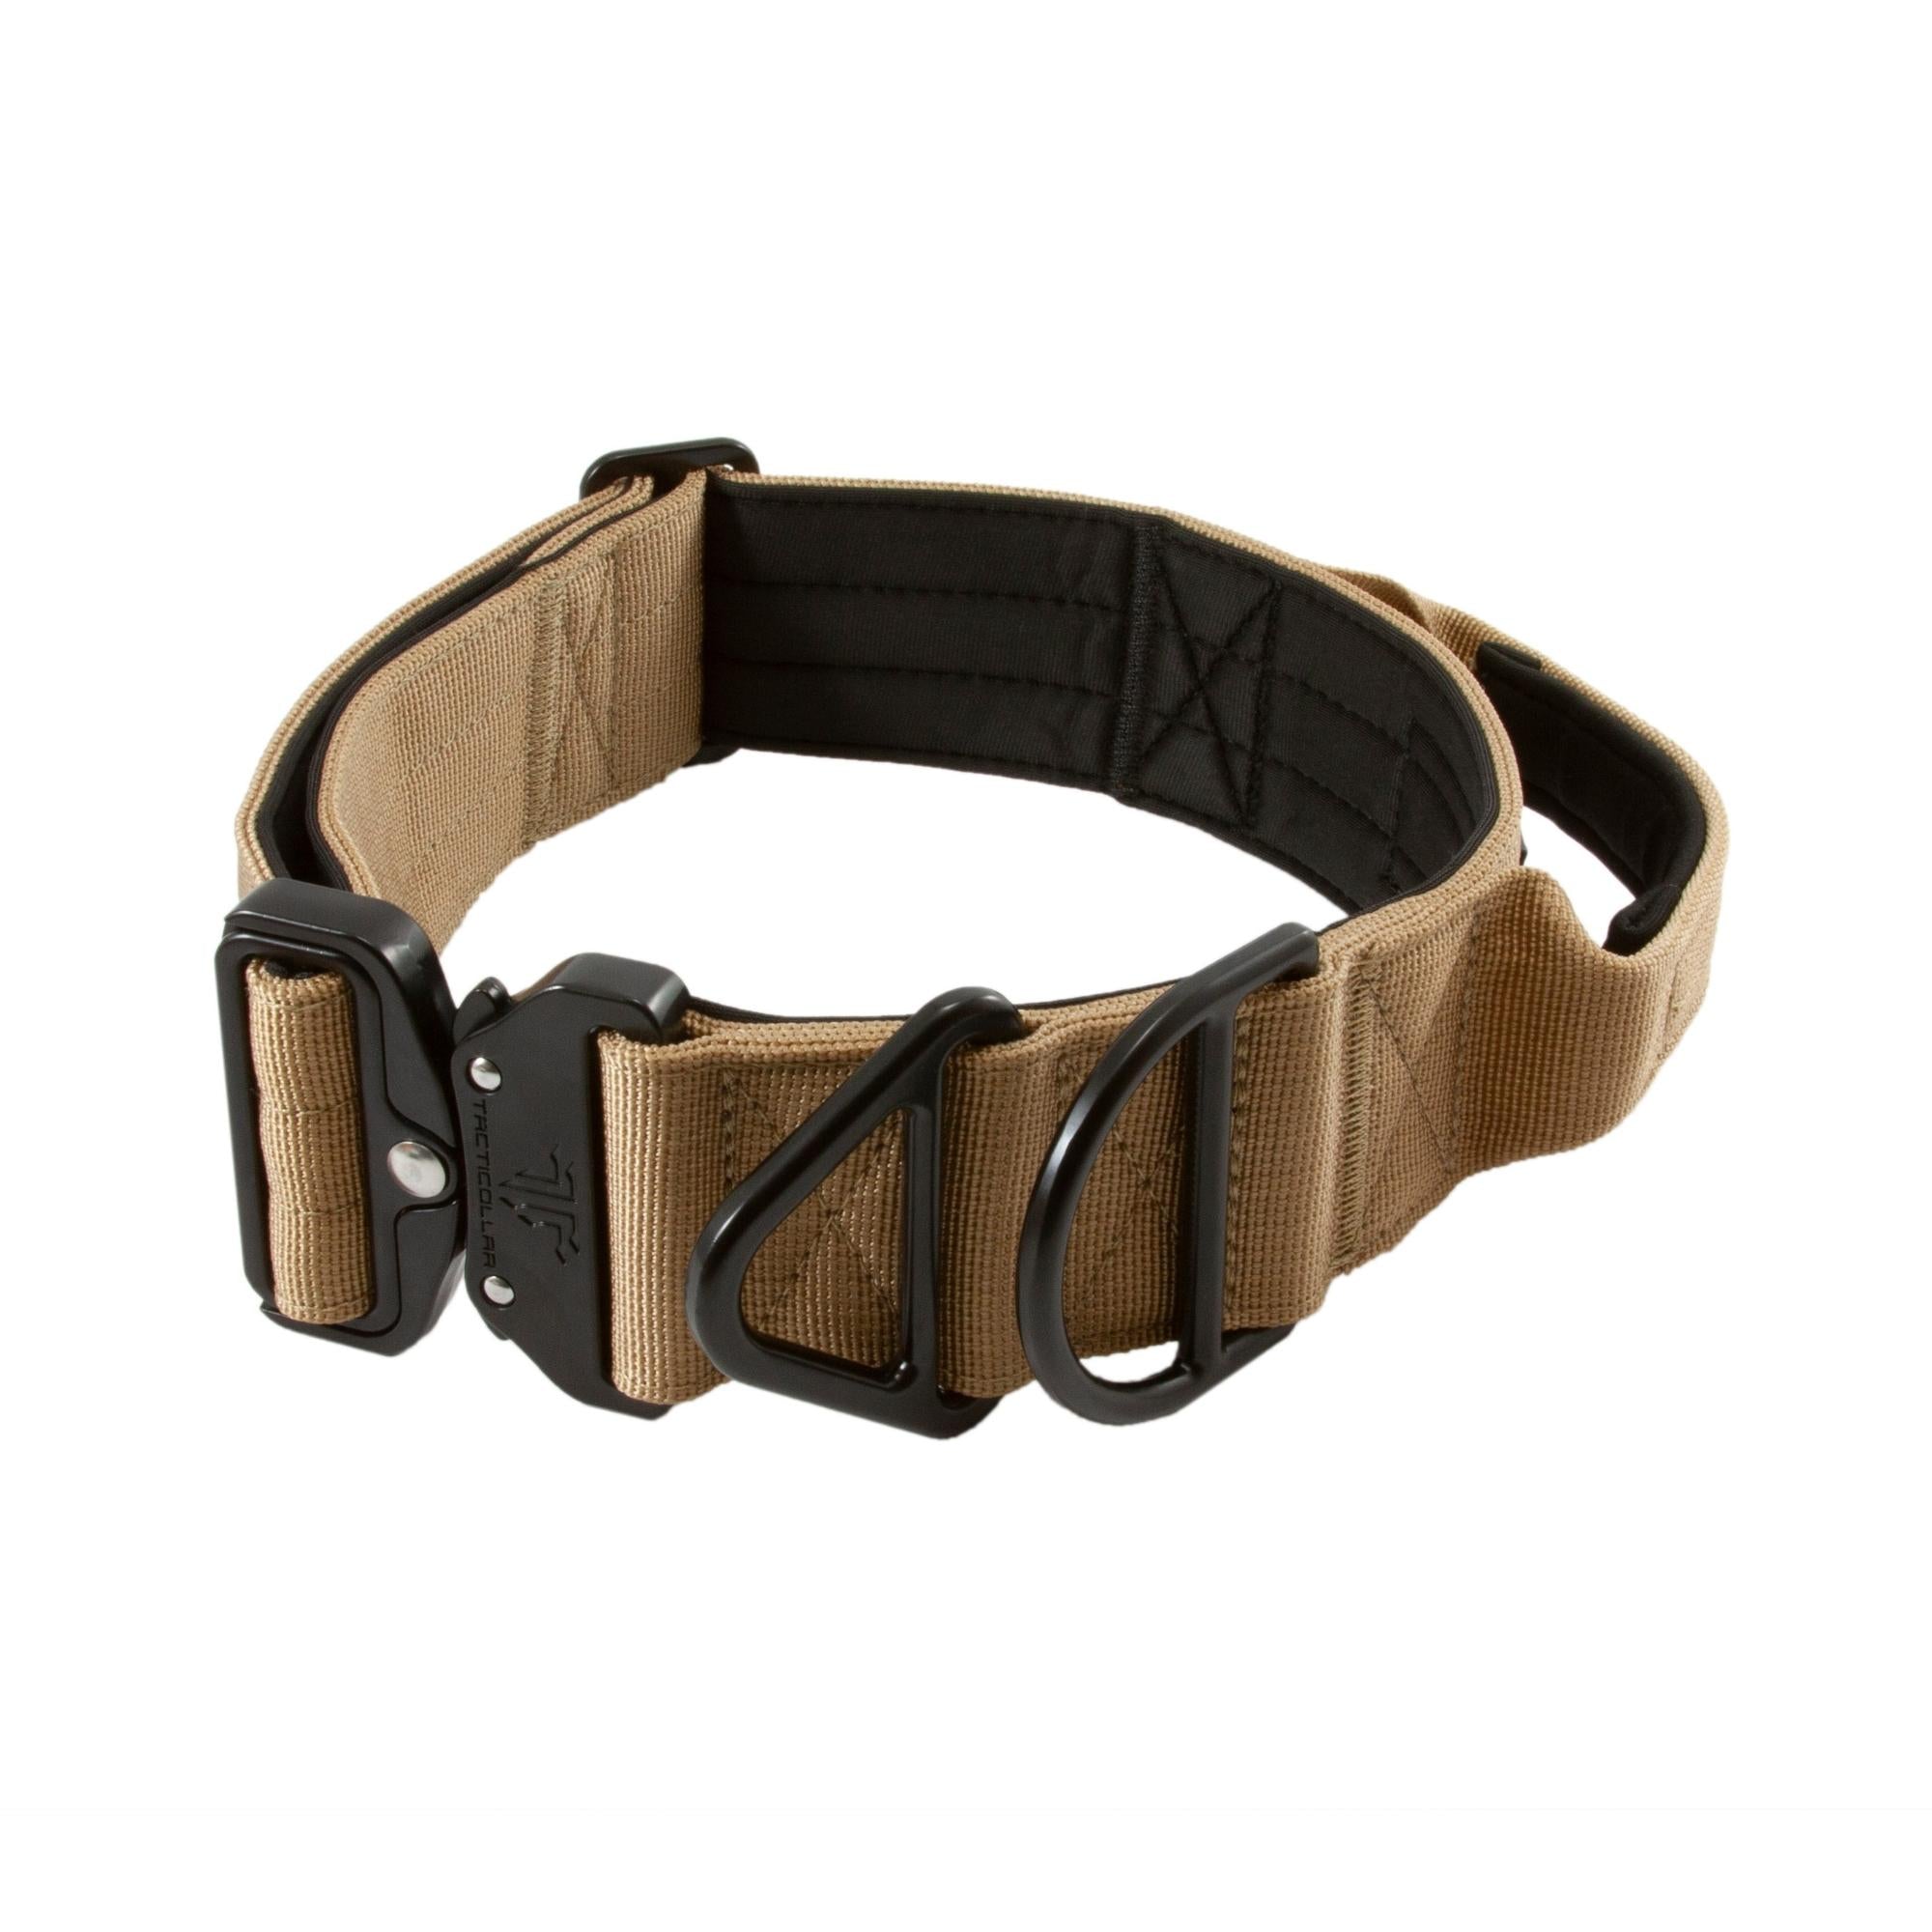 2 inch tactical dog collar coyote brown. Do Not Pet dog collar, working dogs, reactive dogs, training dogs, dogs that need space.